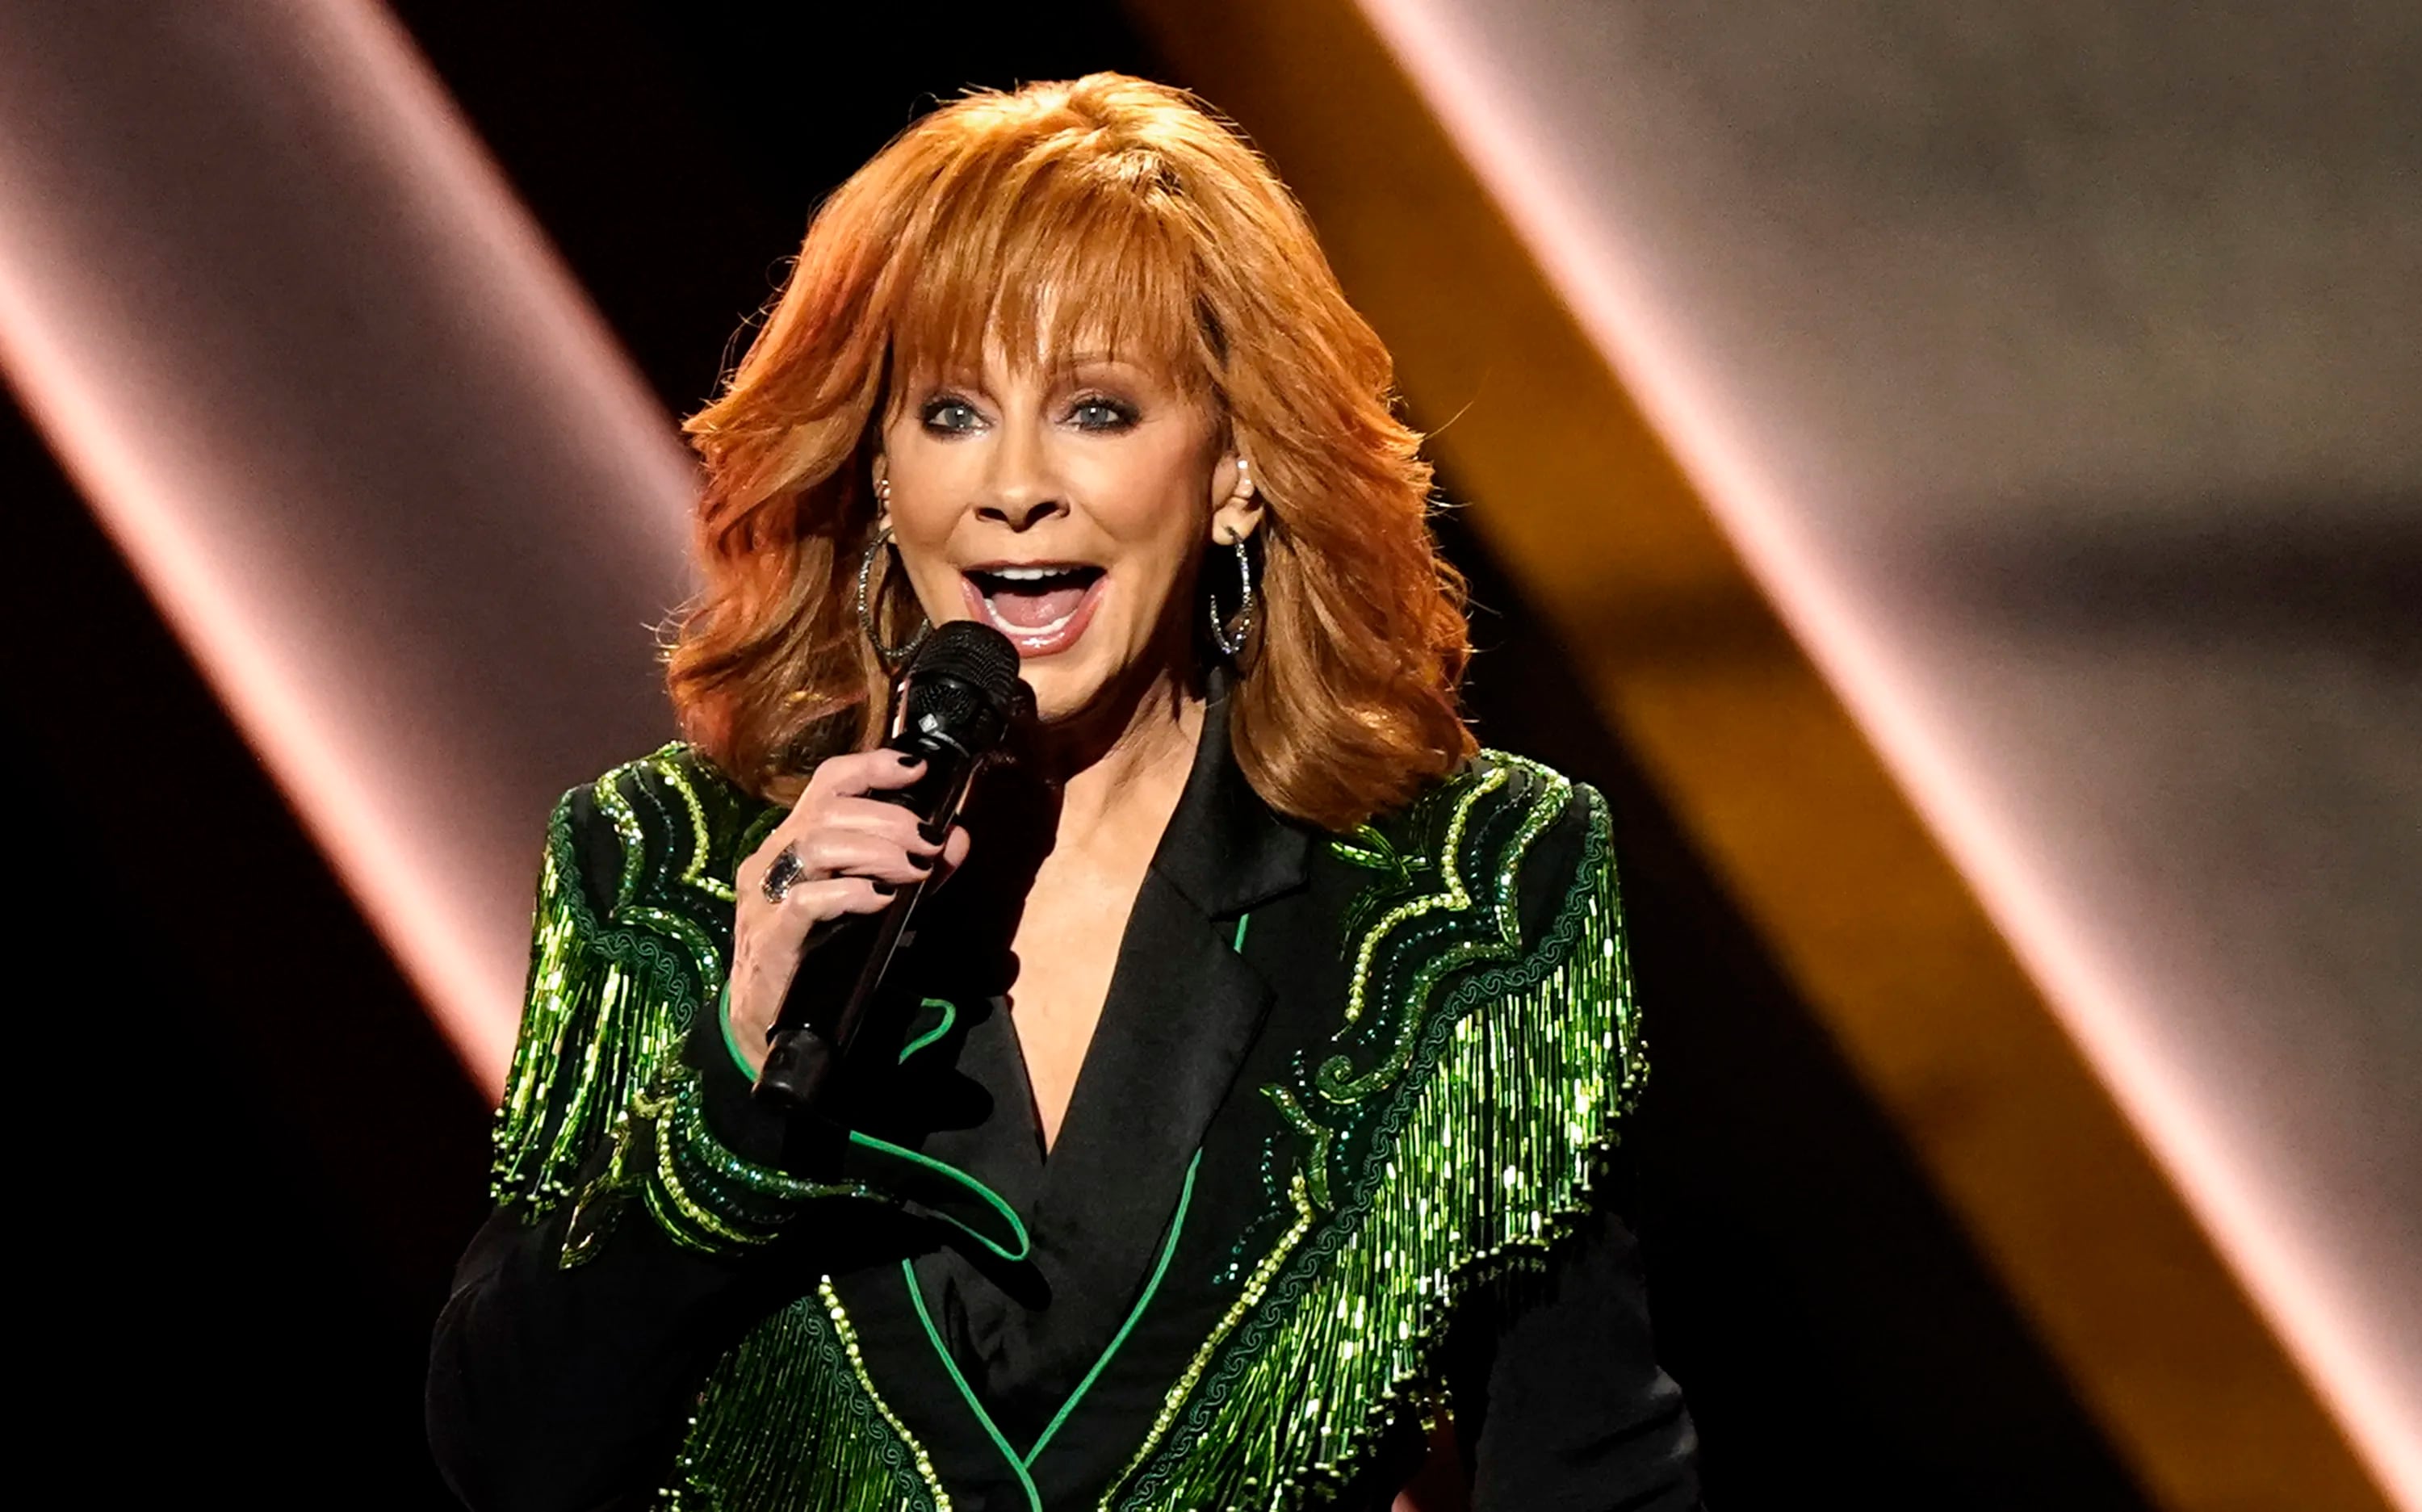 Reba Mcentire Fucking Videos - Corn mazes near Philly are showing their love for Reba McEntire